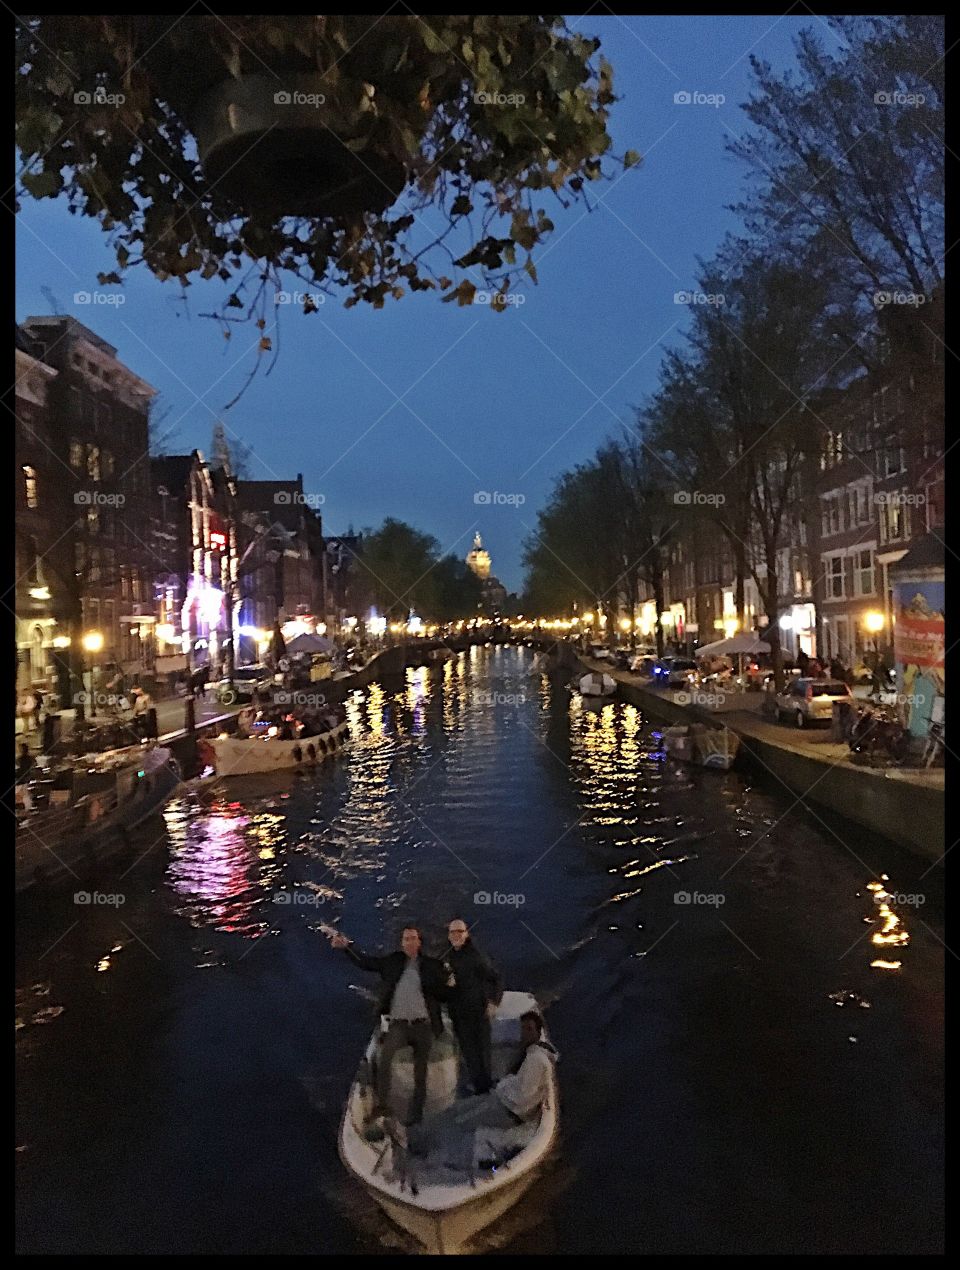 Amsterdam canal. People on boat.